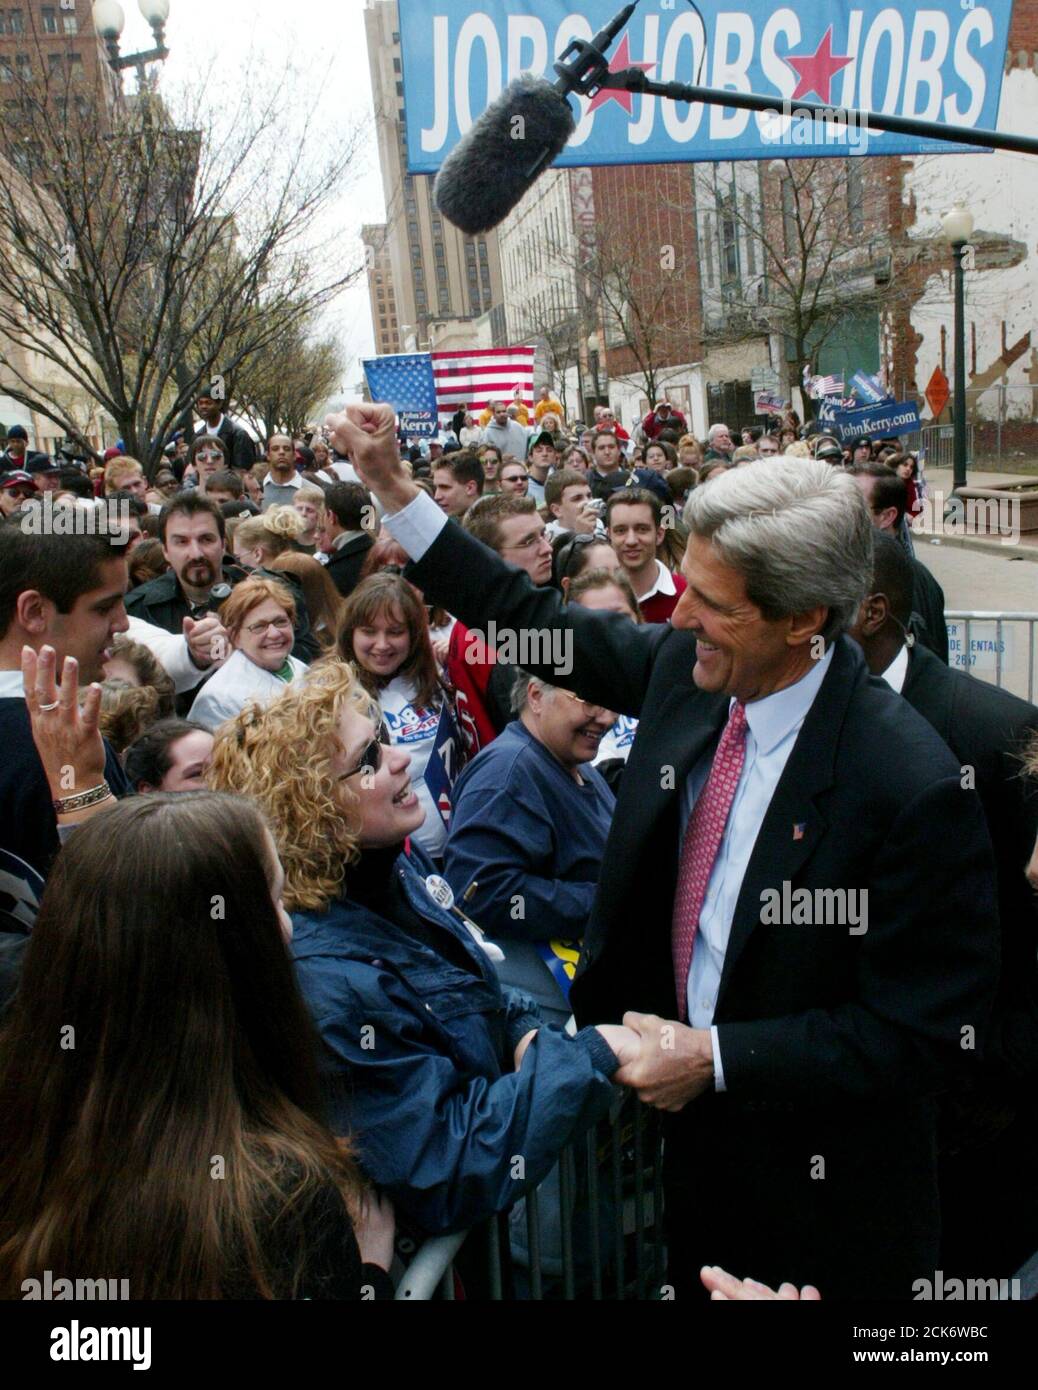 U.S. Presidential candidate John Kerry greets supporters gathered in the middle of Federal Street for a 'Jobs Tour' rally in Youngstown, Ohio, April 27, 2004. Kerry is campaigning in Ohio as he continues his three-day bus trip through the states of West Virginia, Pennsylvania, Ohio and Michigan. REUTERS/Jim Bourg US ELECTION  JRB Stock Photo